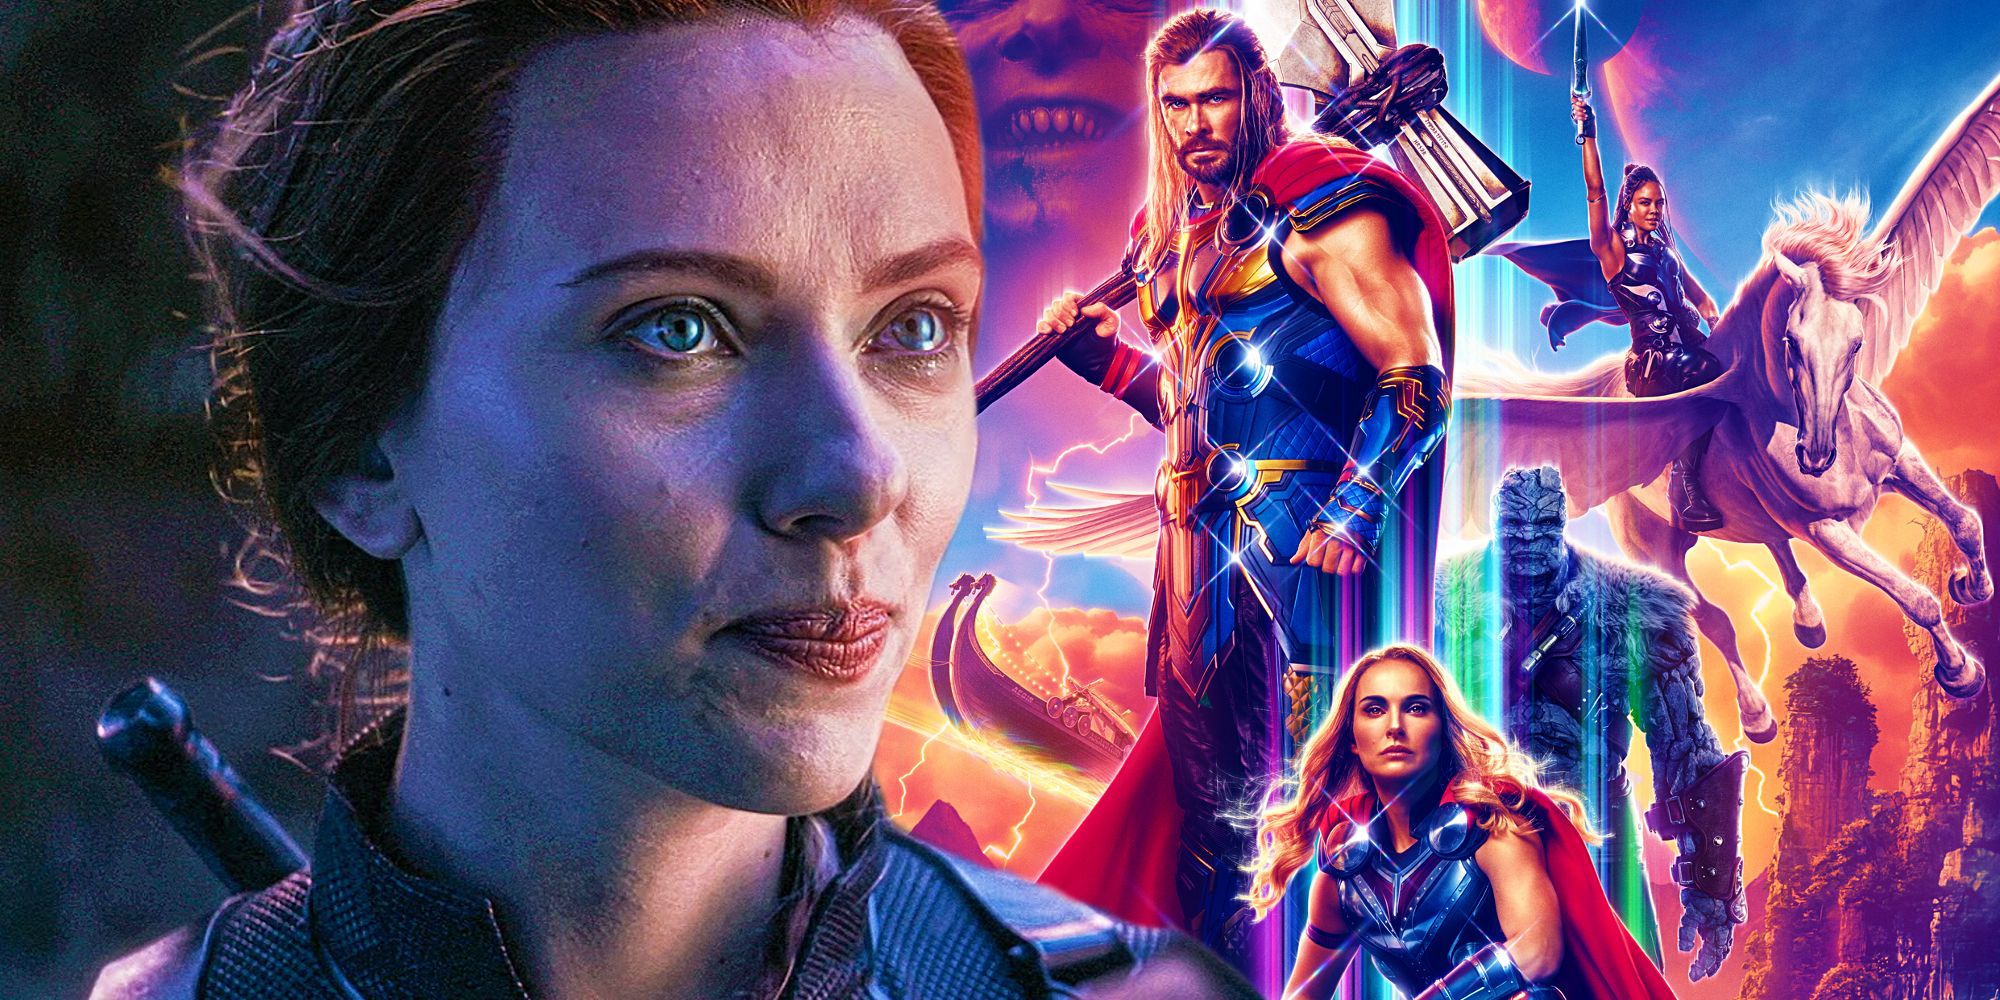 Black Widow crying just before her death in Avengers: Endgame next to the poster for Thor: Love and Thunder